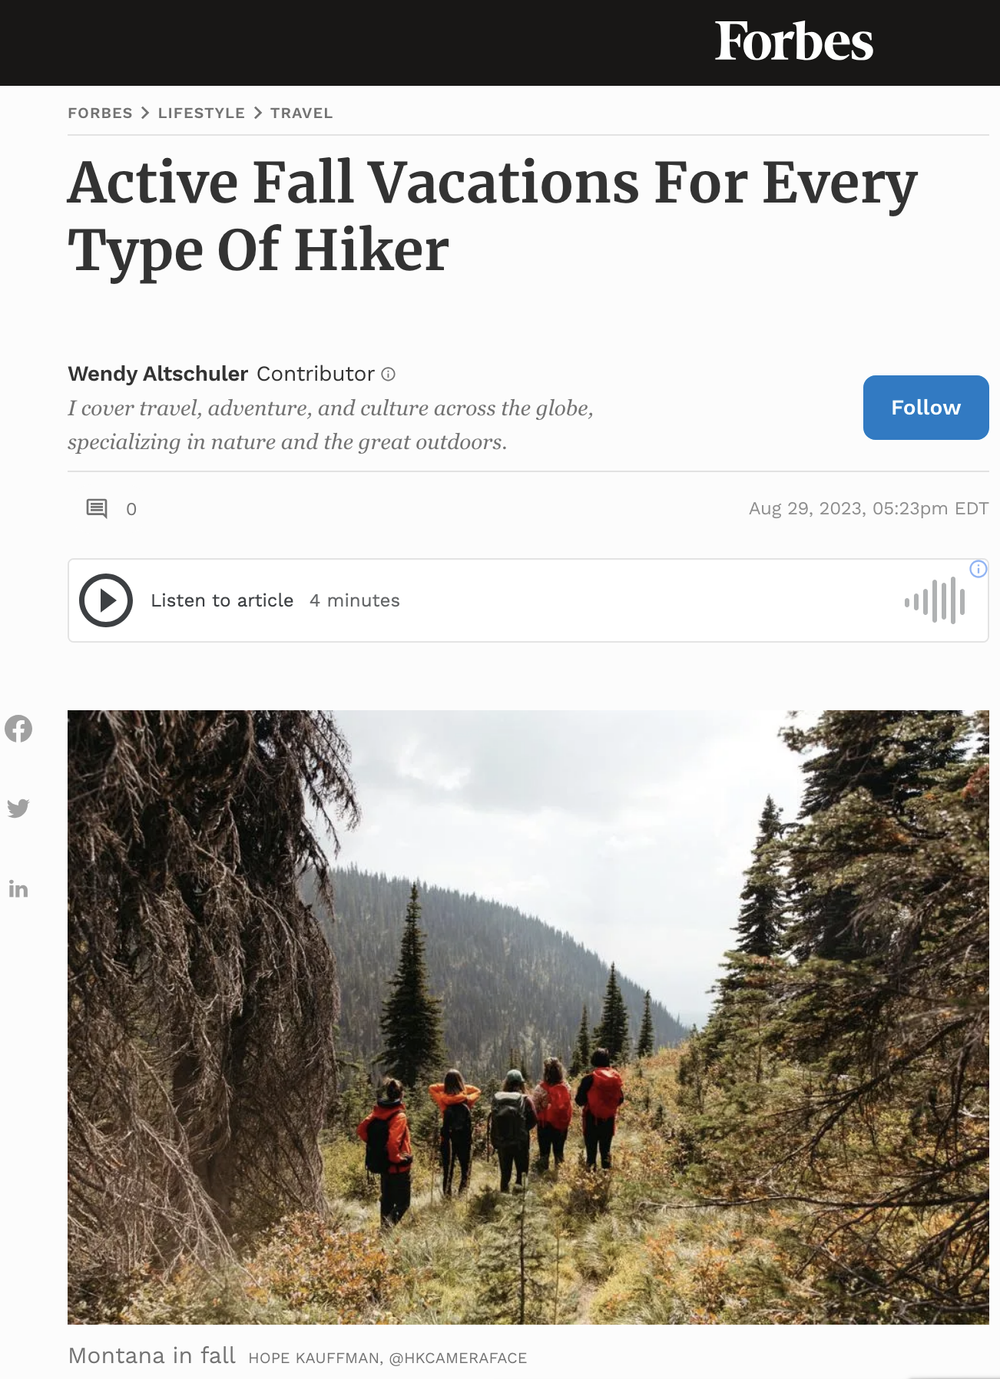 Active Fall Vacations For Every Type Of Hiker